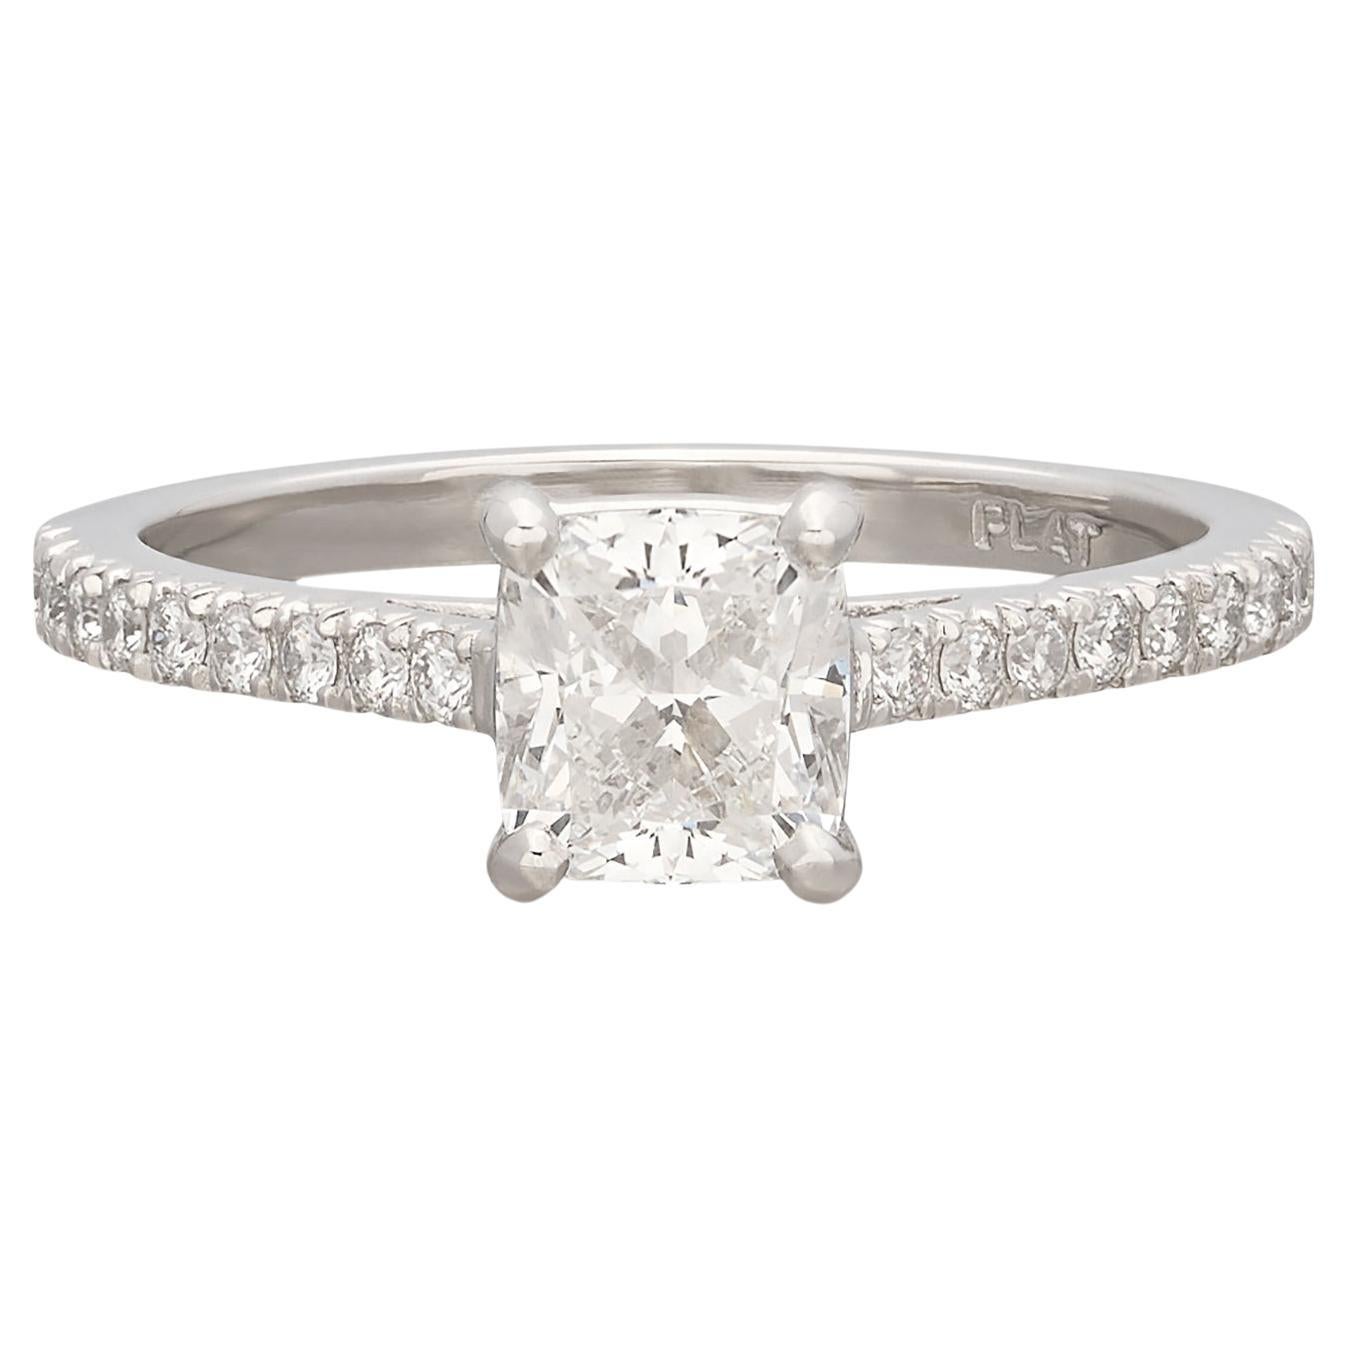 Remarkable Platinum GIA Cushion Cut Diamond Ring For Sale